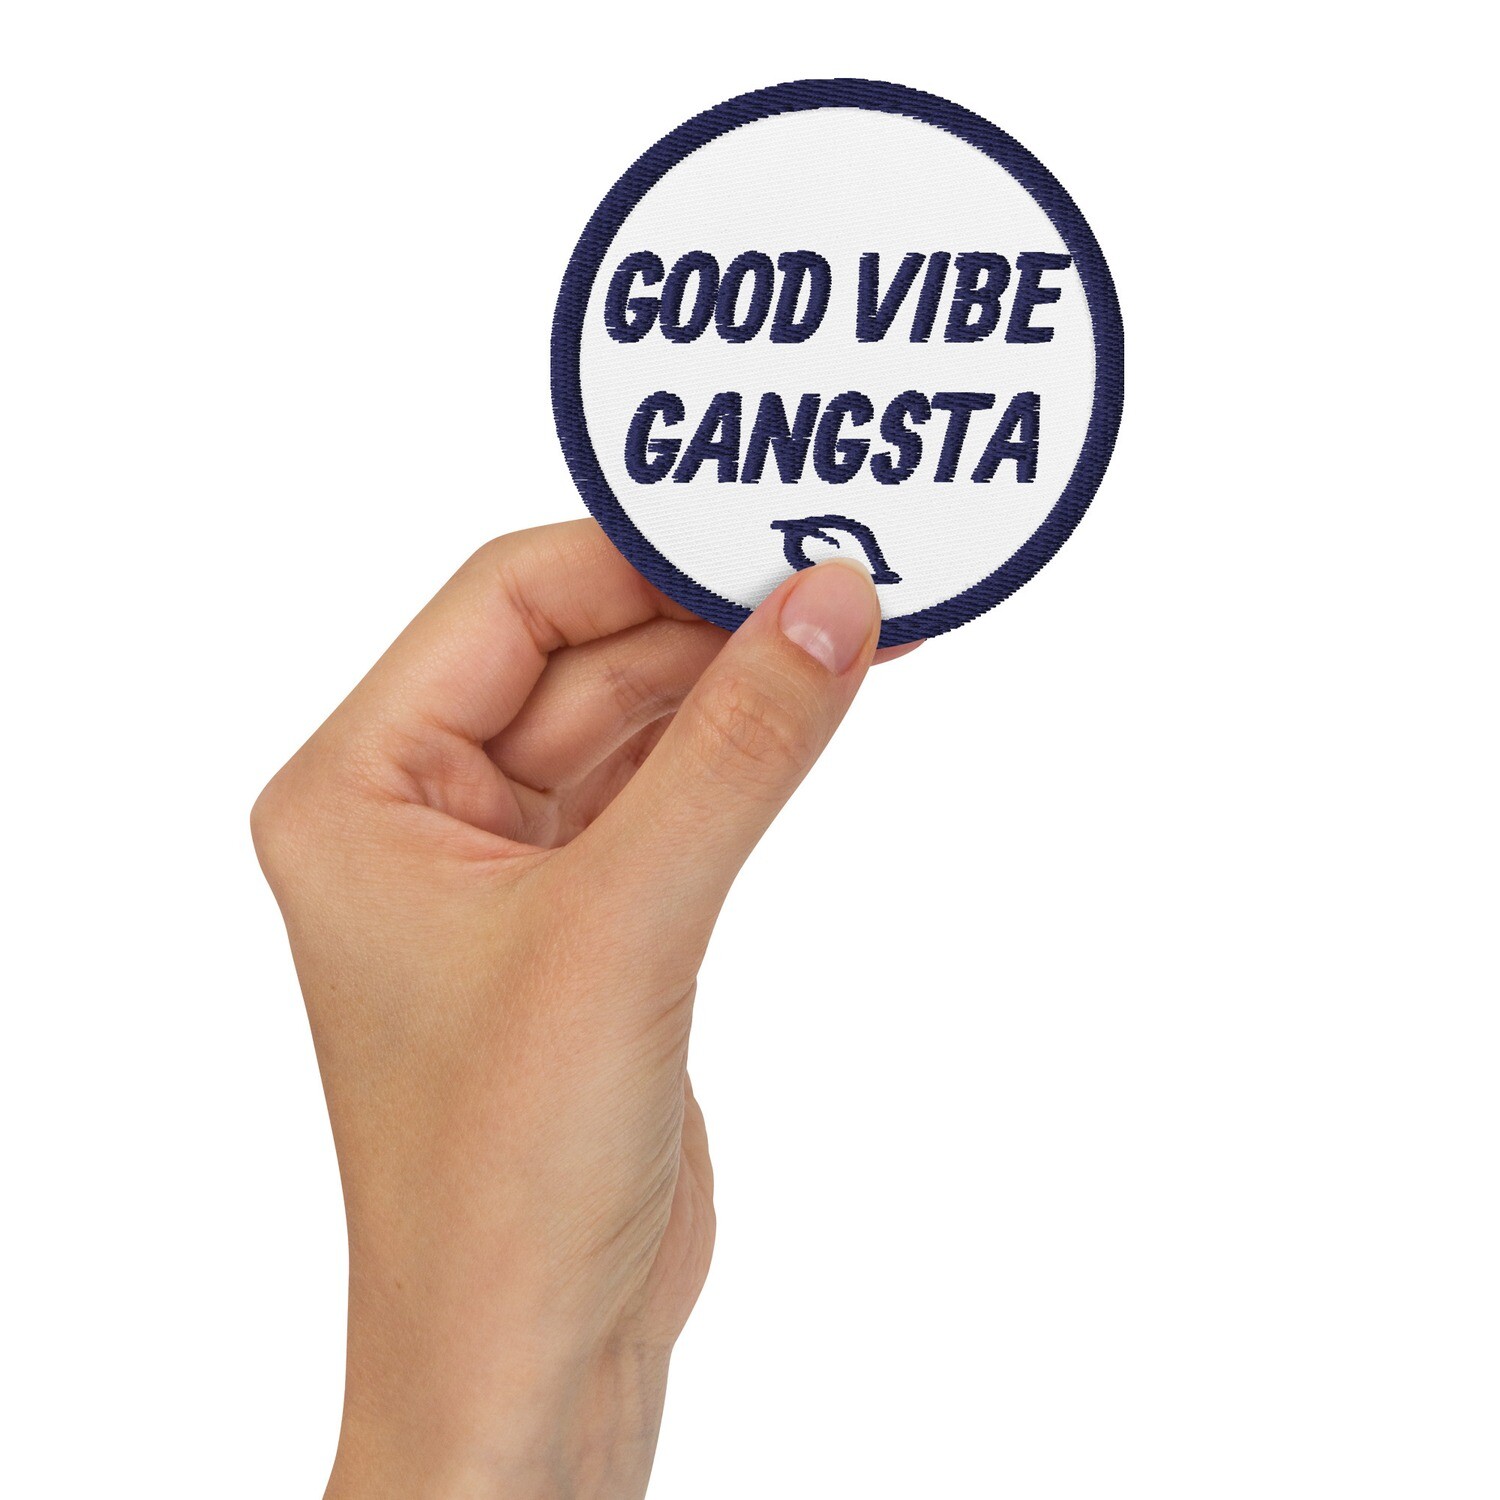 Good Vibe Gangsta | VOS | Embroidered Patch | Navy